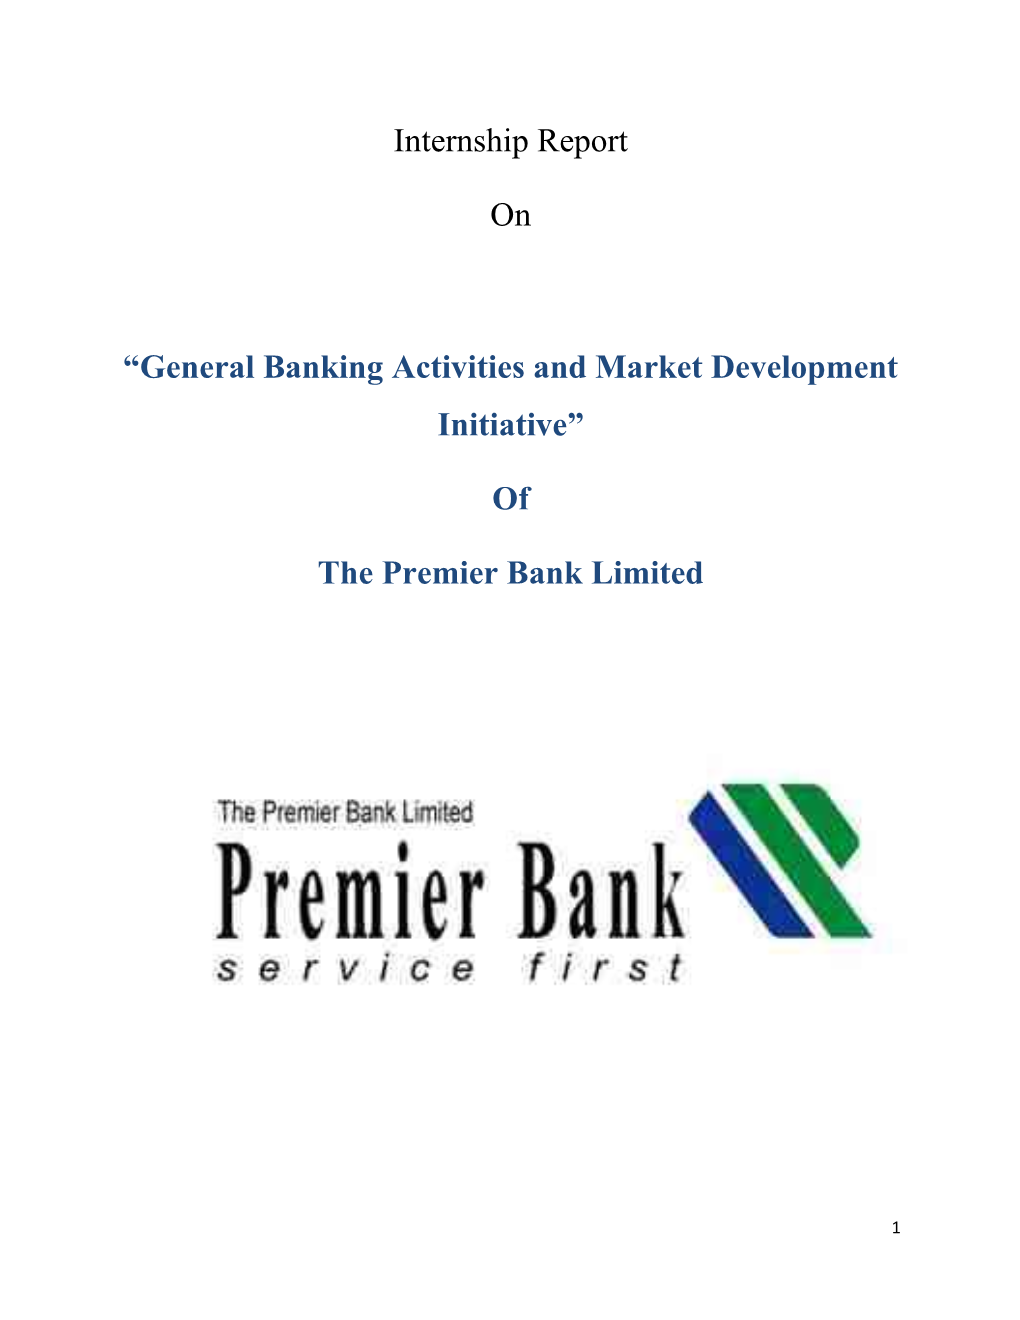 Internship Report on “General Banking Activities and Market Development Initiative” of the Premier Bank Limited